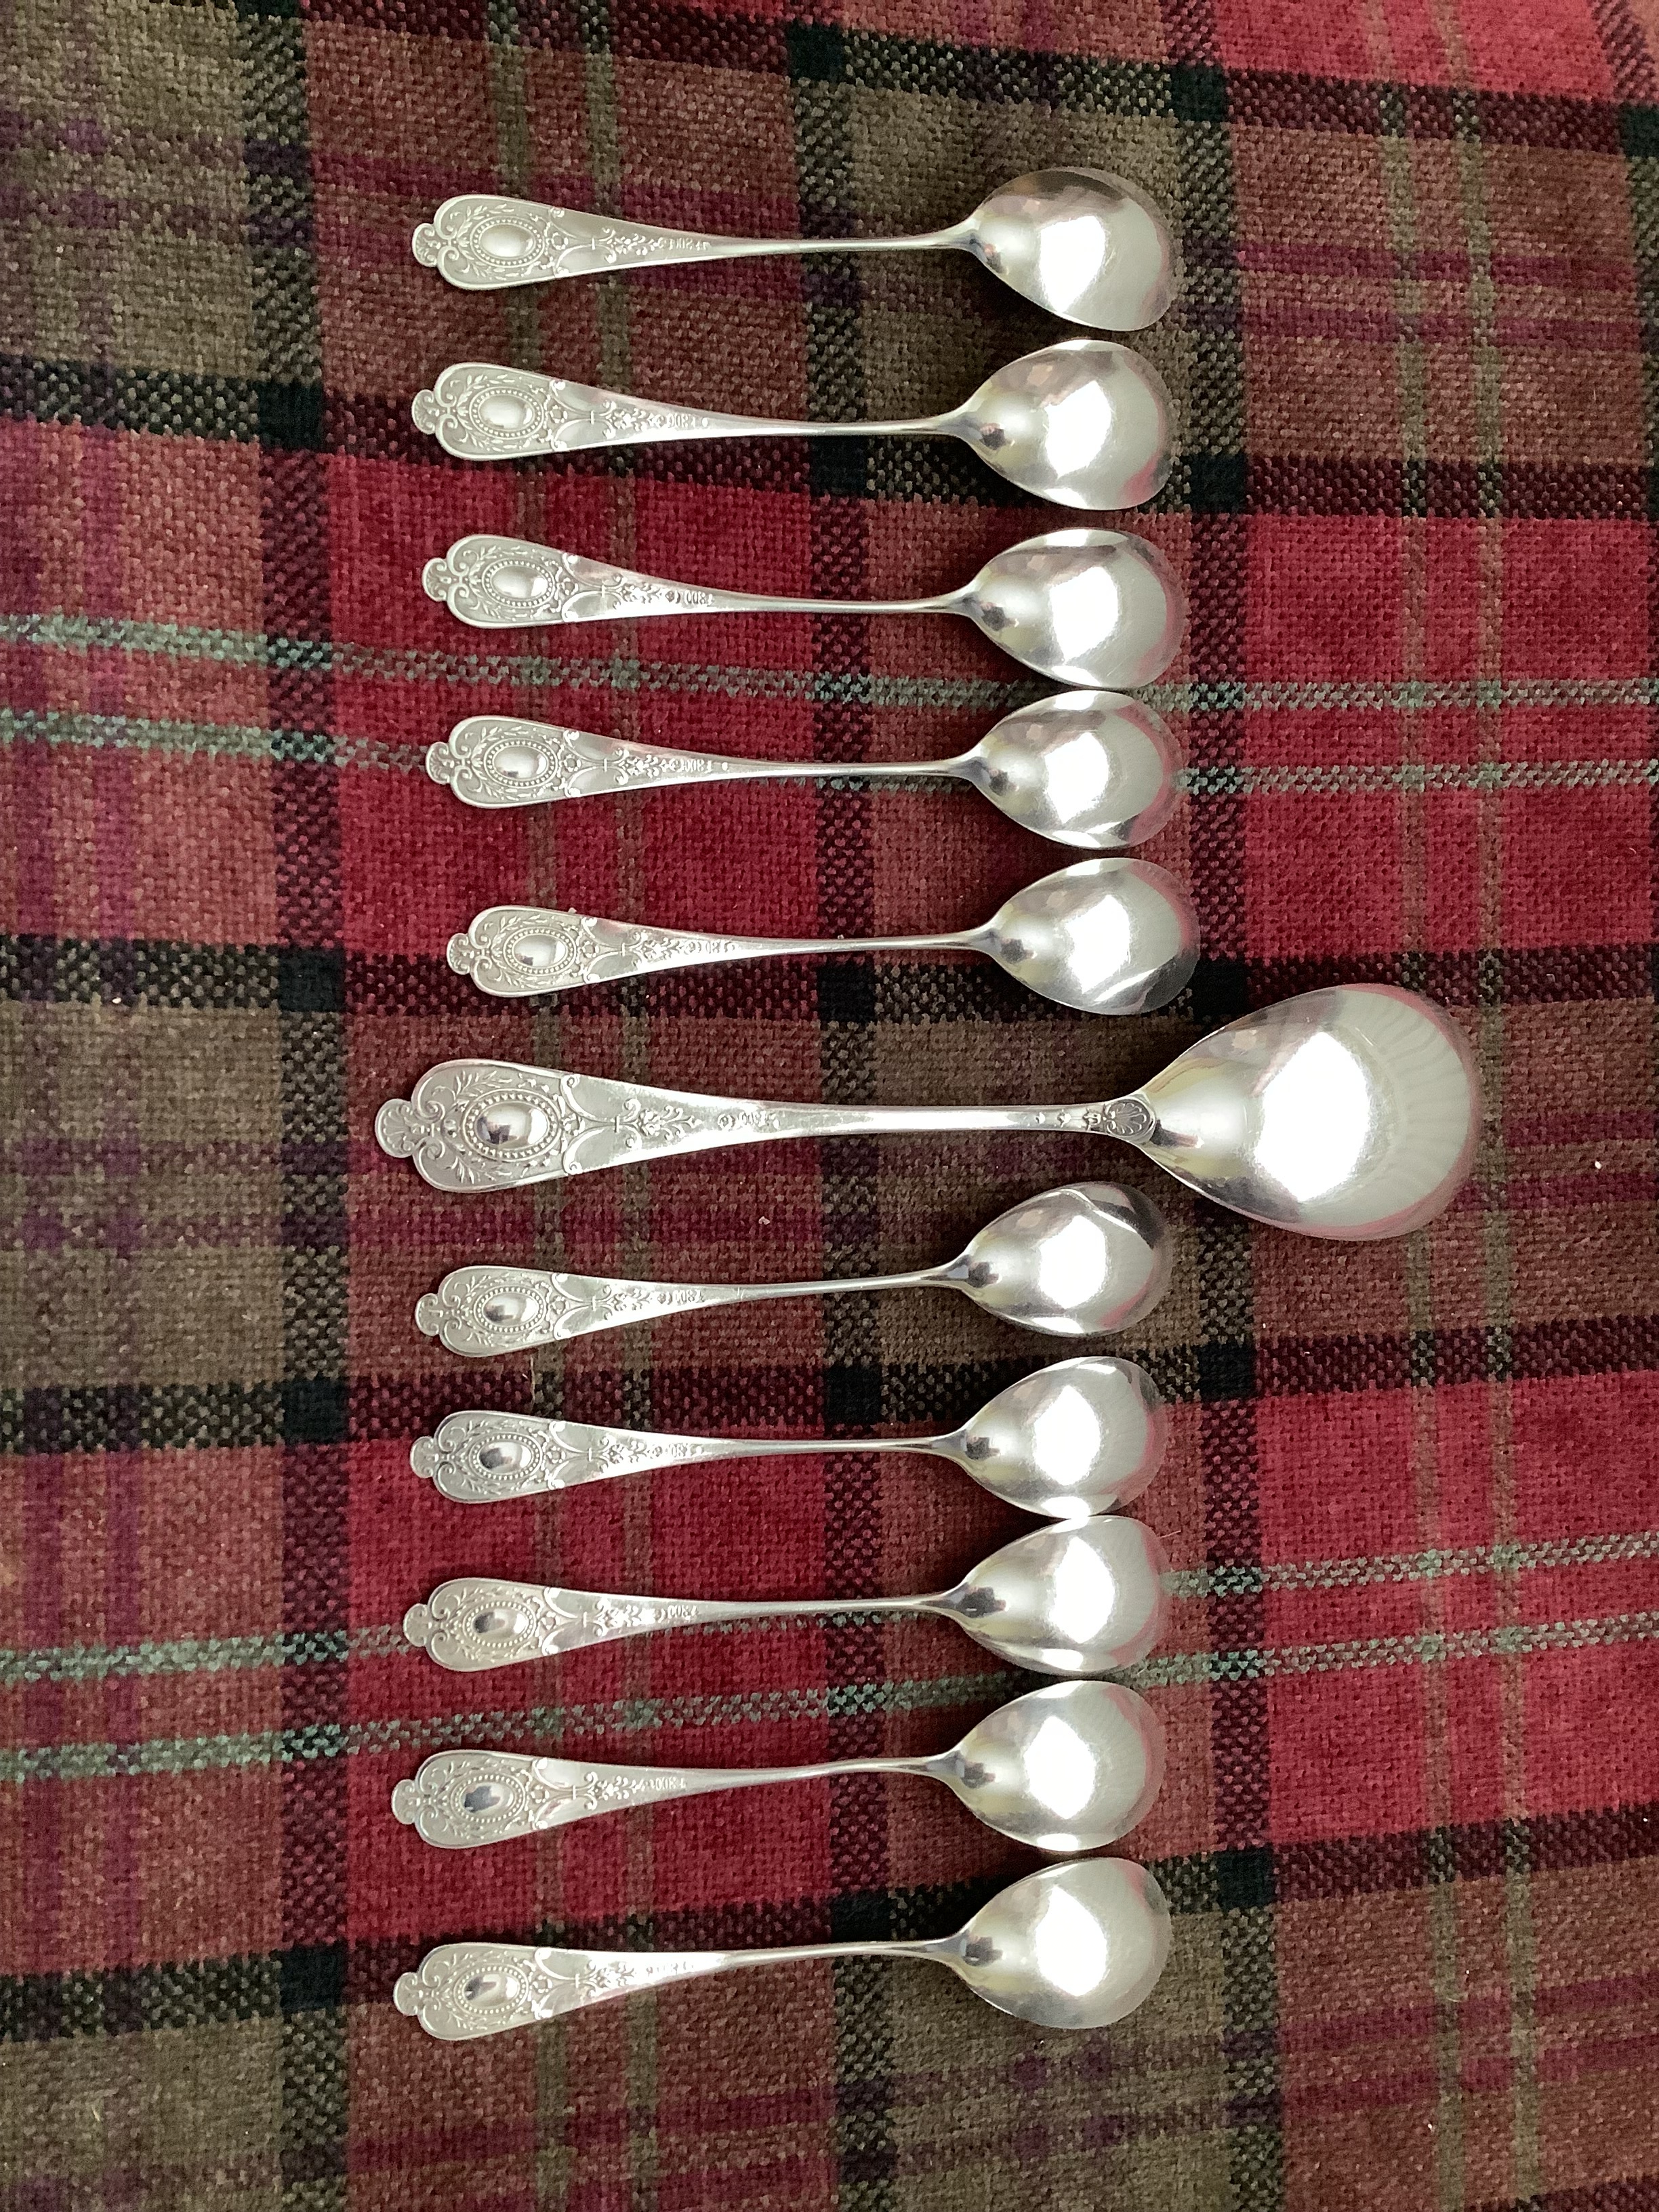 Spoon pattern id - Silver Collector Forums